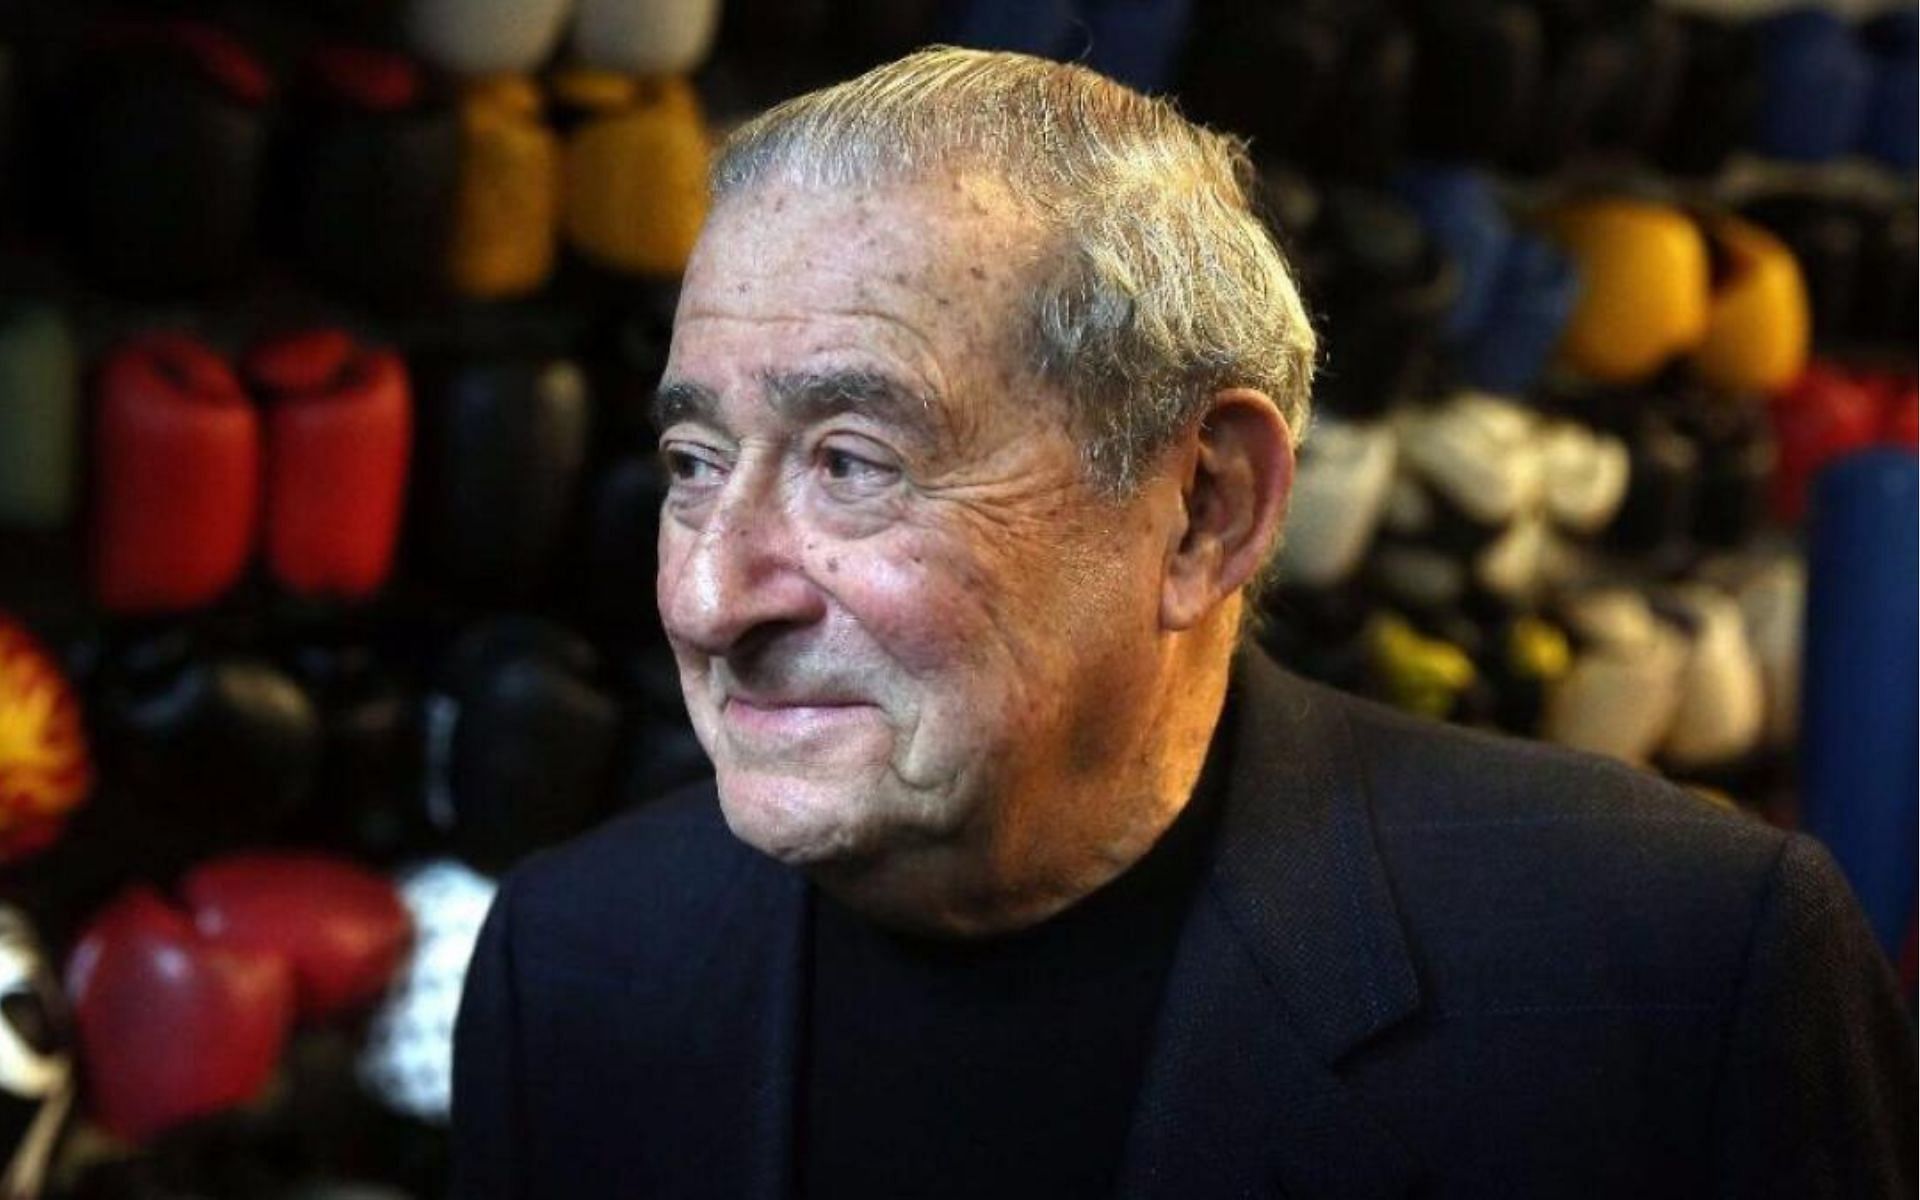 Top Rank CEO Bob Arum (pictured) objected to the result of Josh Taylor vs. Jack Catterall 2 [Photo Courtesy: Getty Images]